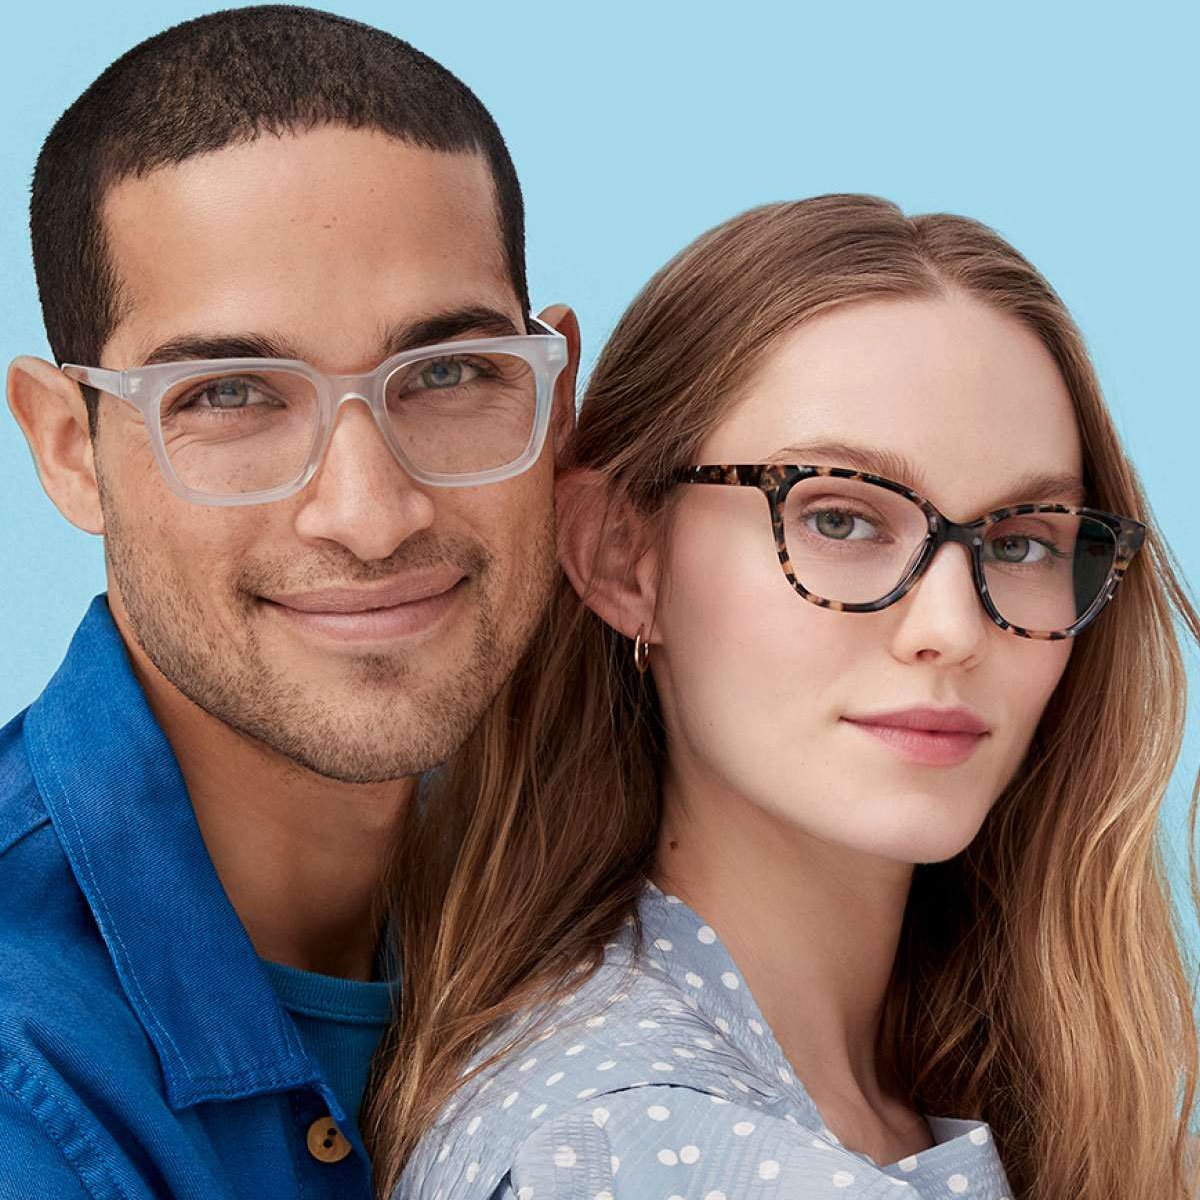 Man and woman wearing glasses against a blue background